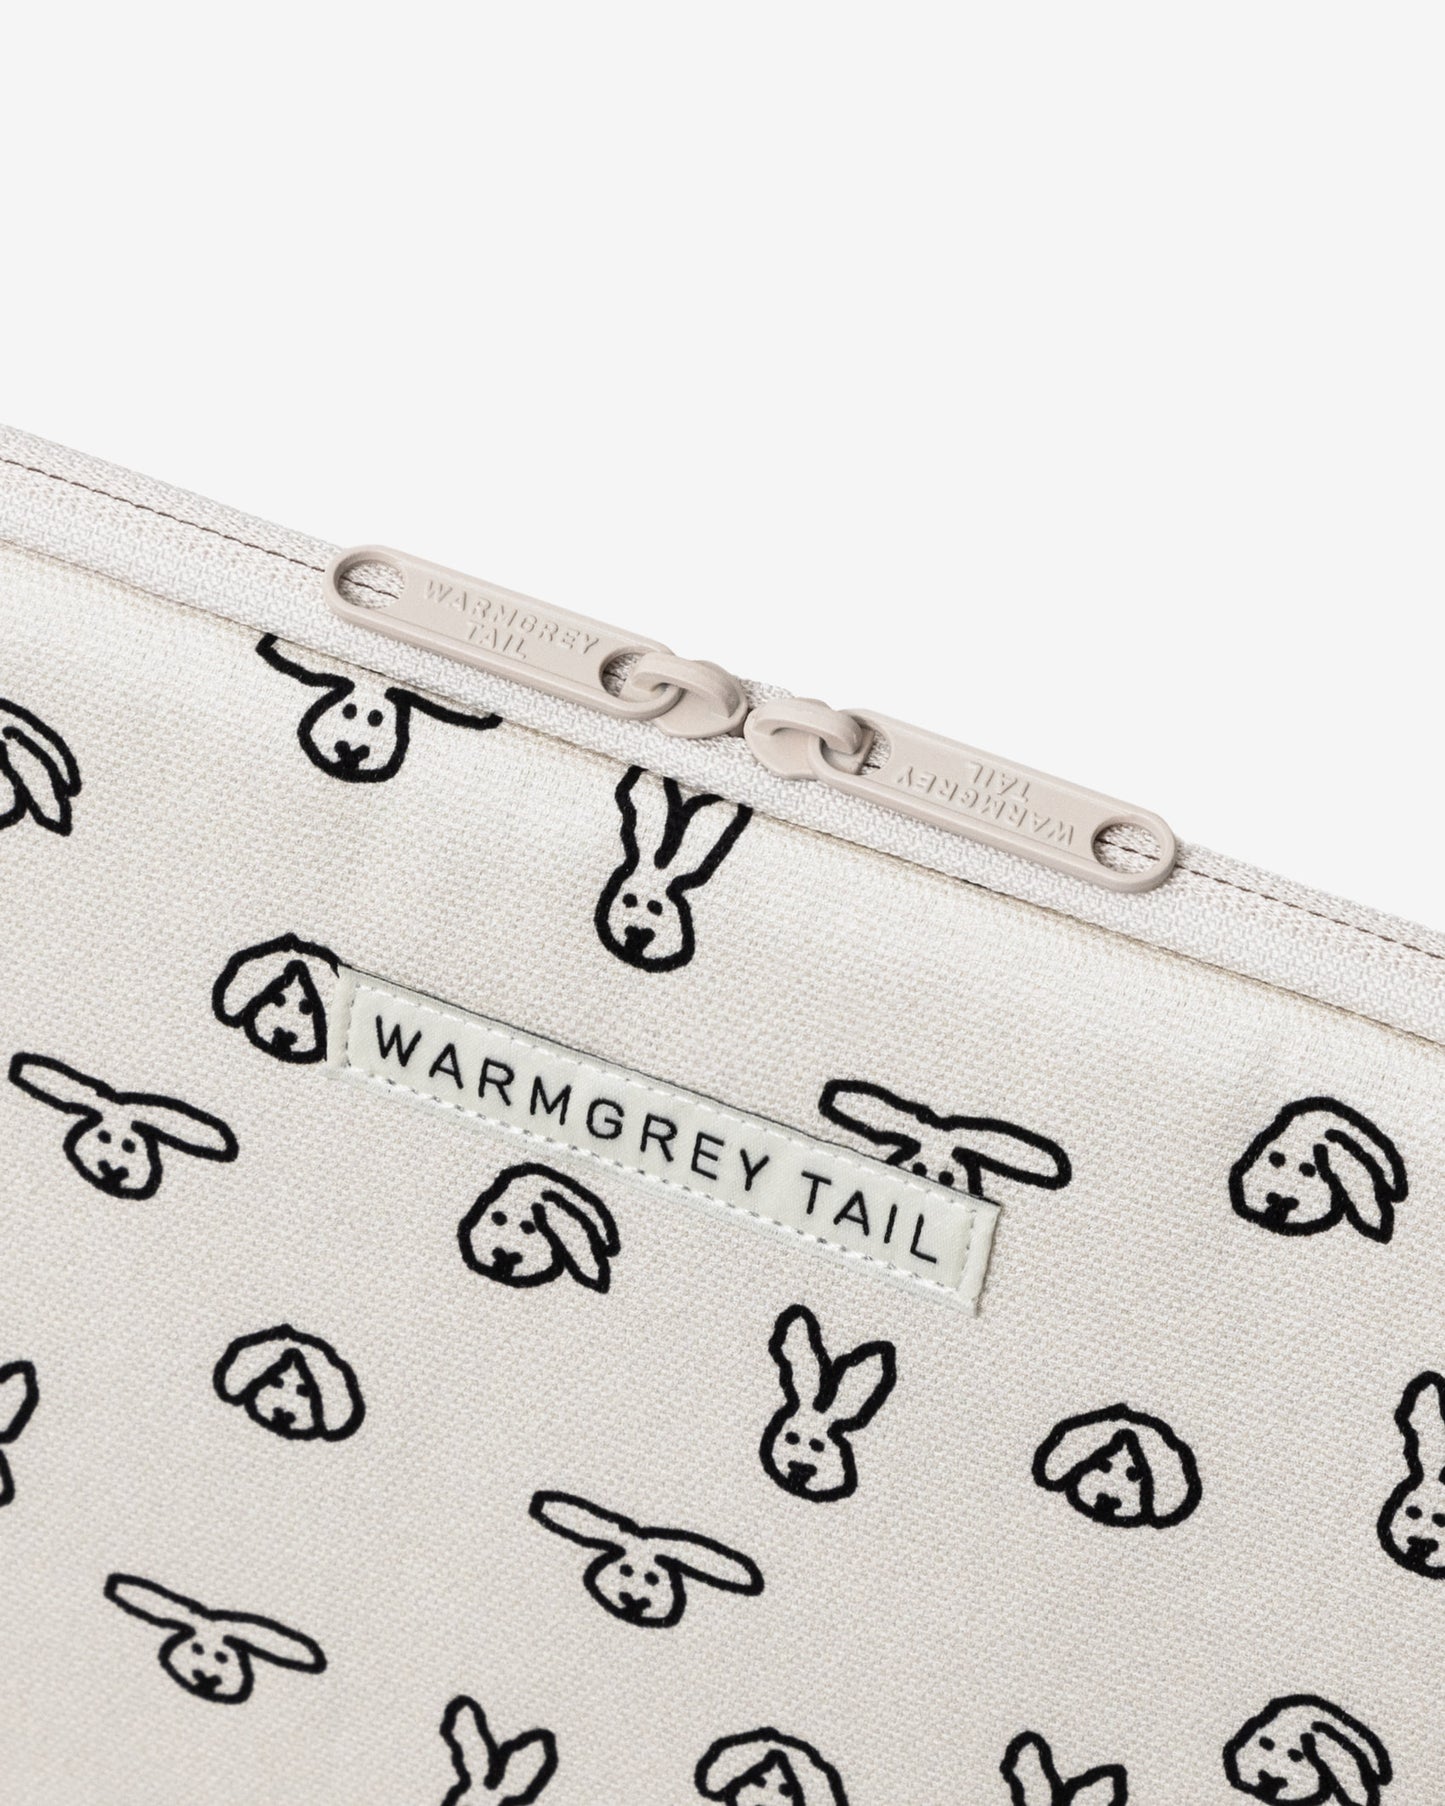 LAPTOP/TABLET POUCH - BUNNY BUNNY